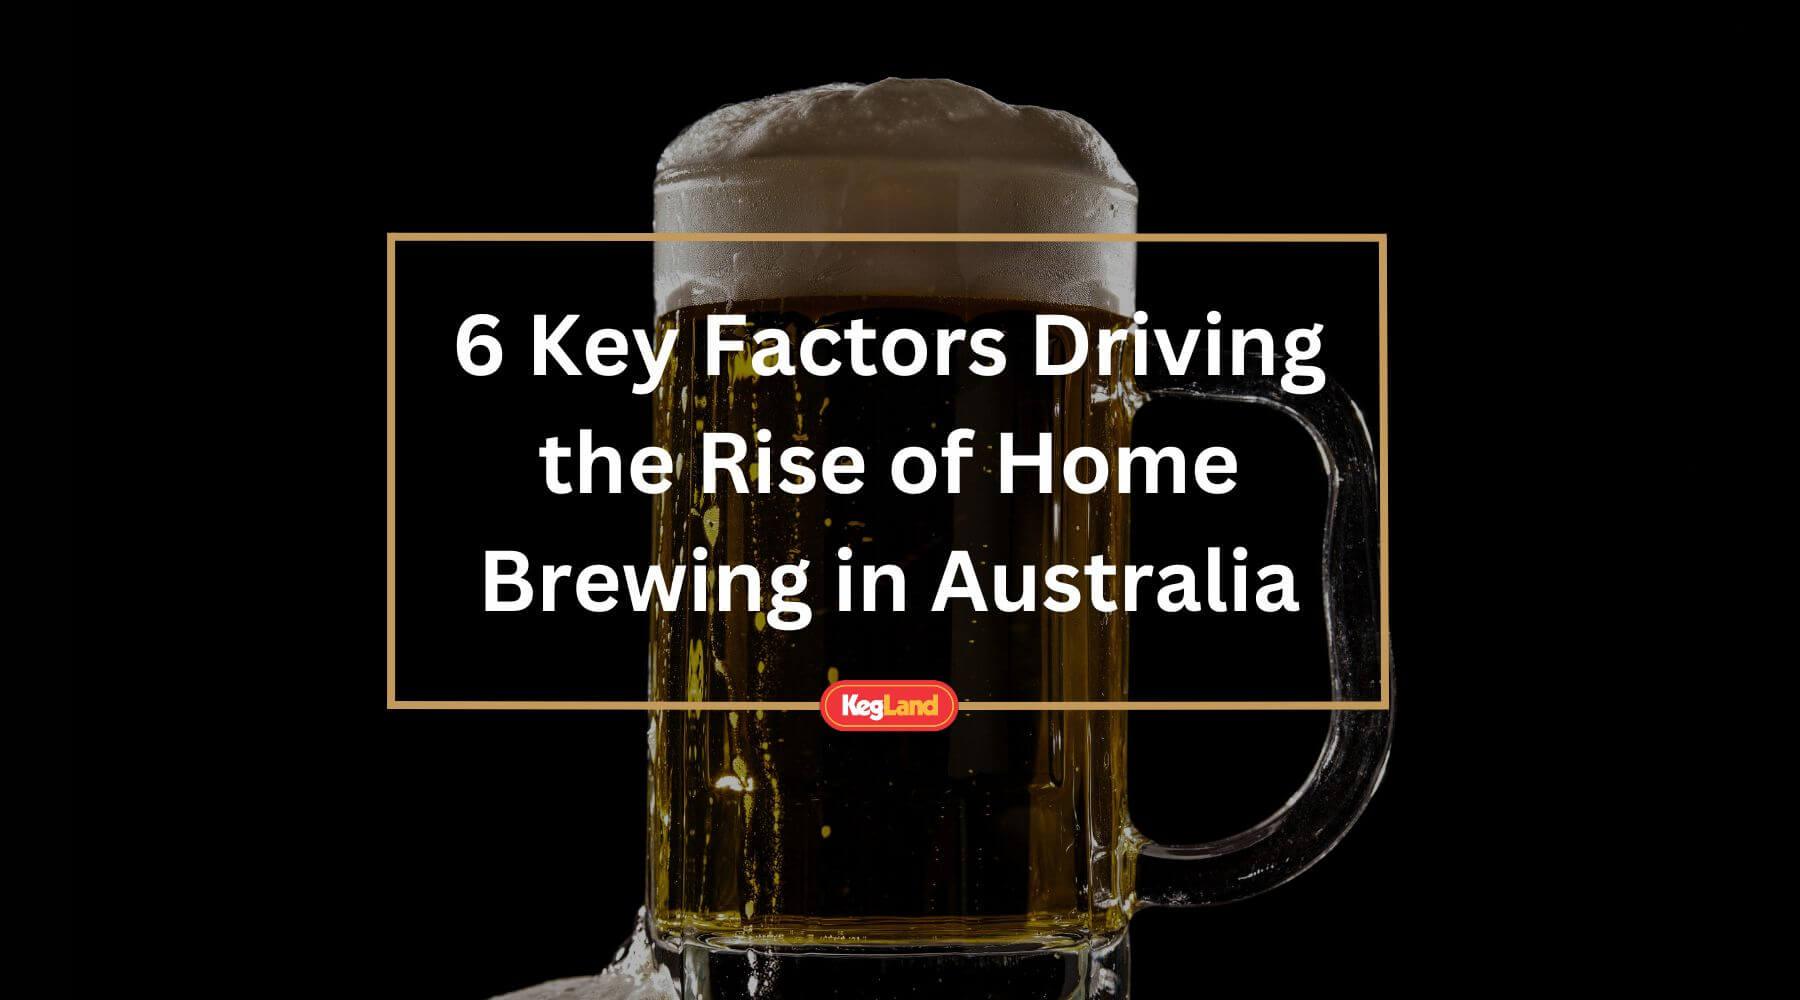 The 6 Key Factors Driving the Rise of Home Brewing in Australia - KegLand